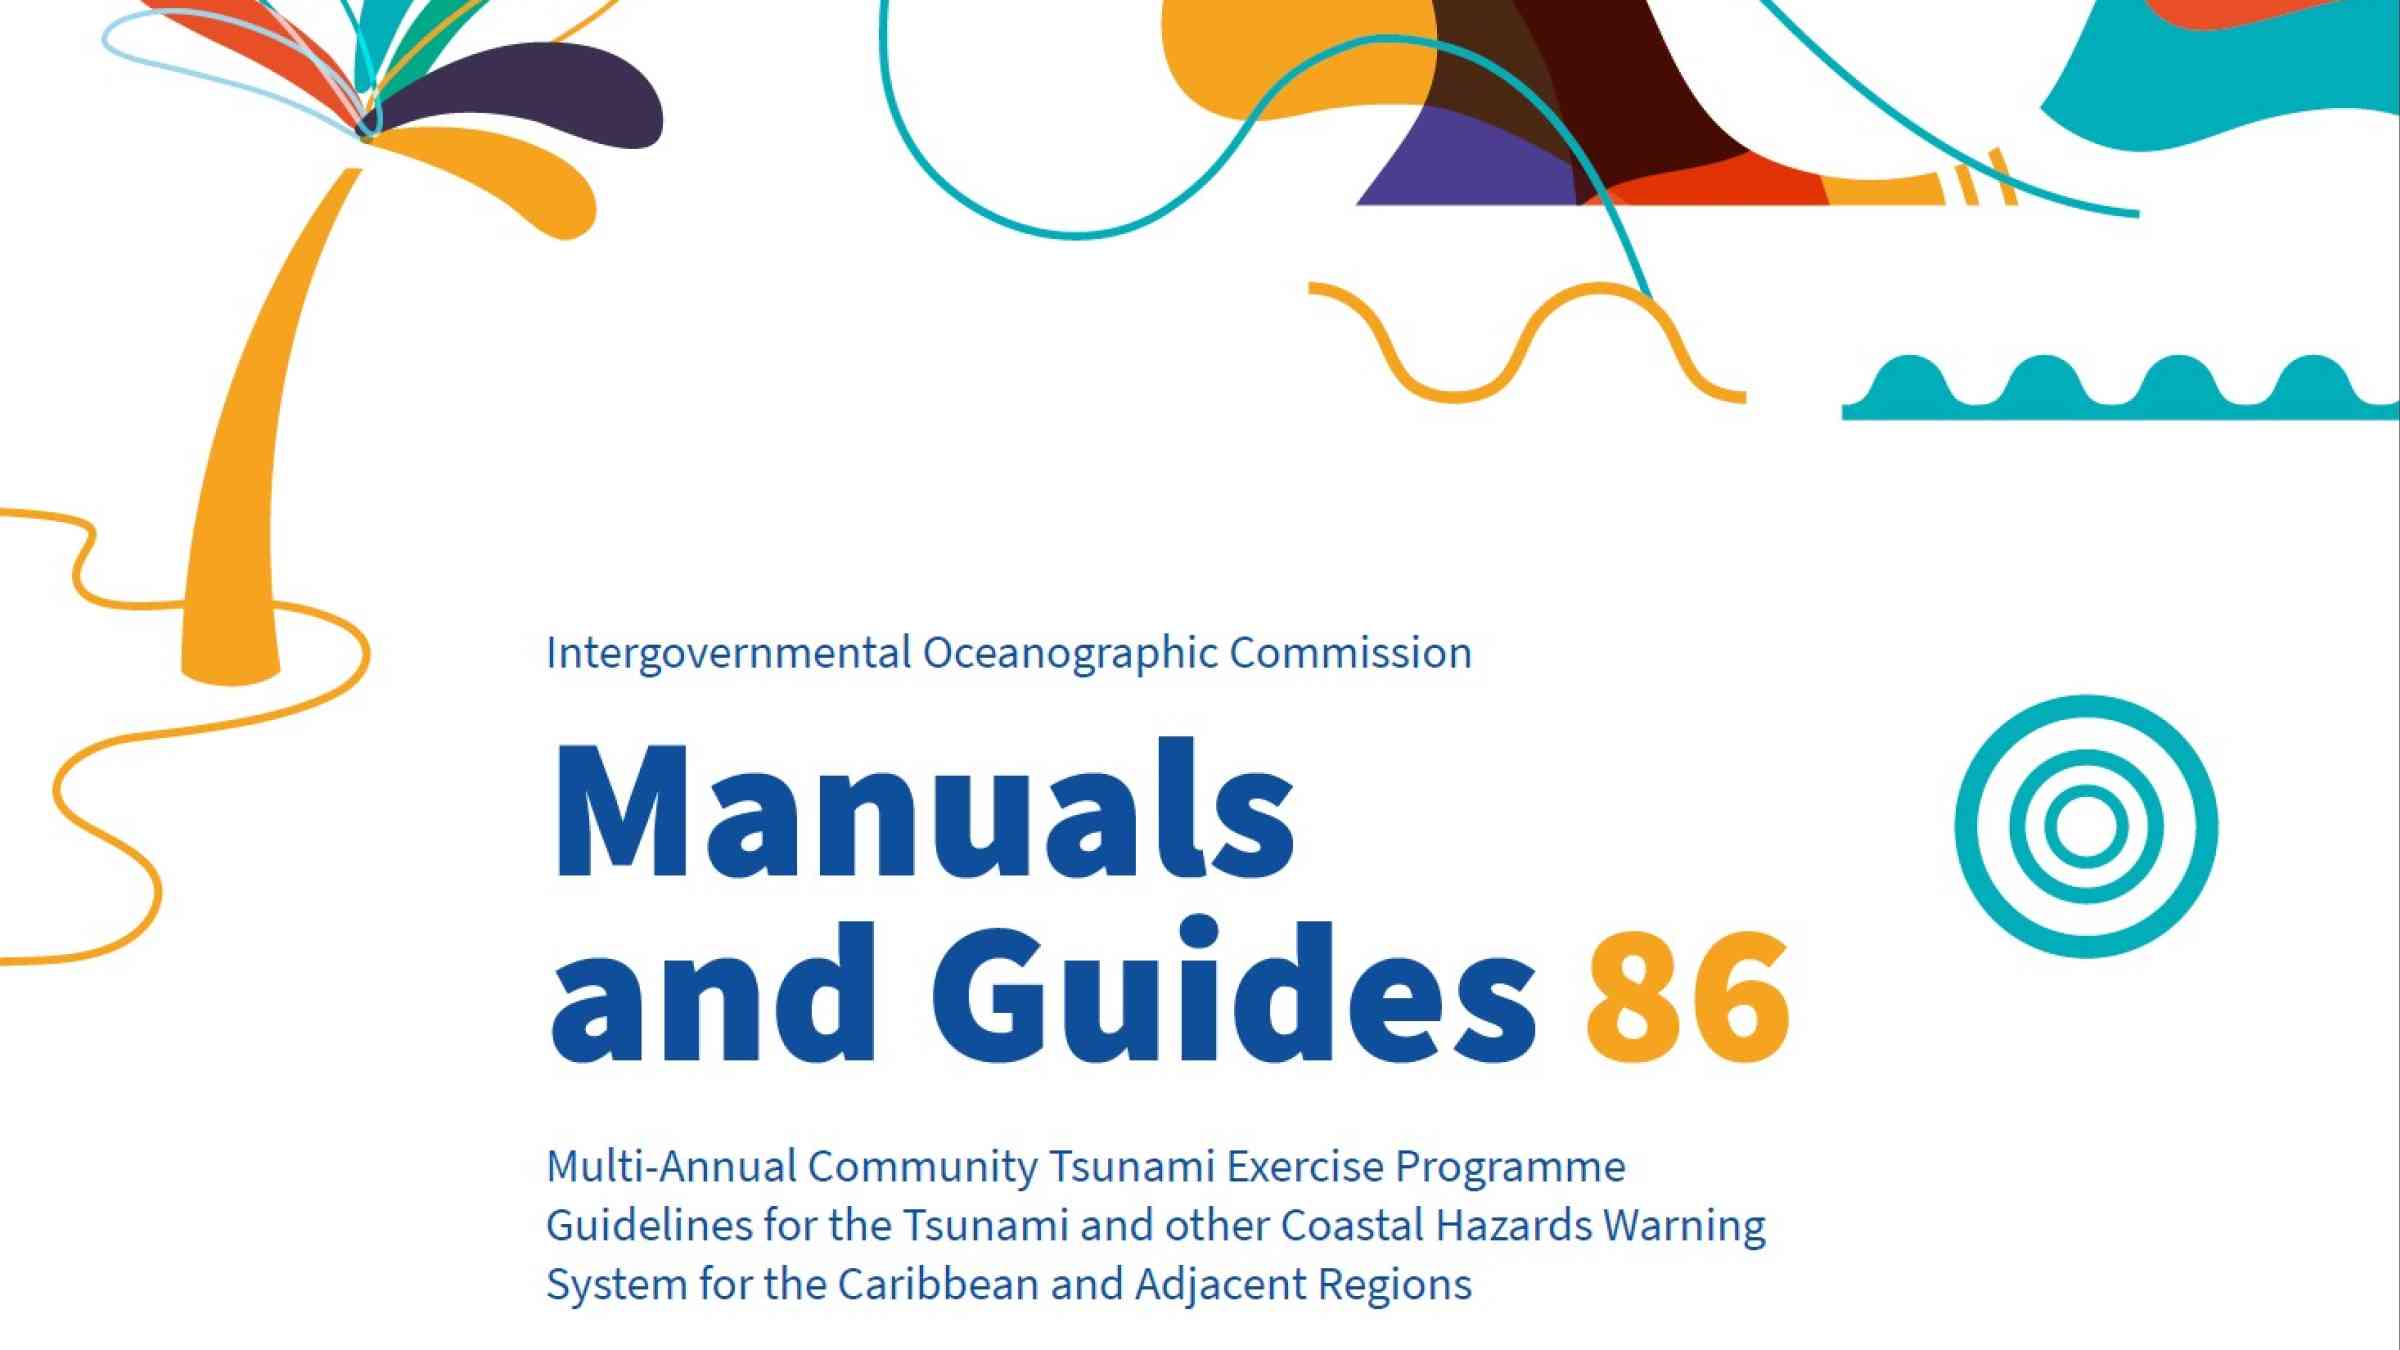 Multi-annual community tsunami exercise programme - guidelines for the tsunami and other coastal hazards warning system for the Caribbean and Adjacent Regions